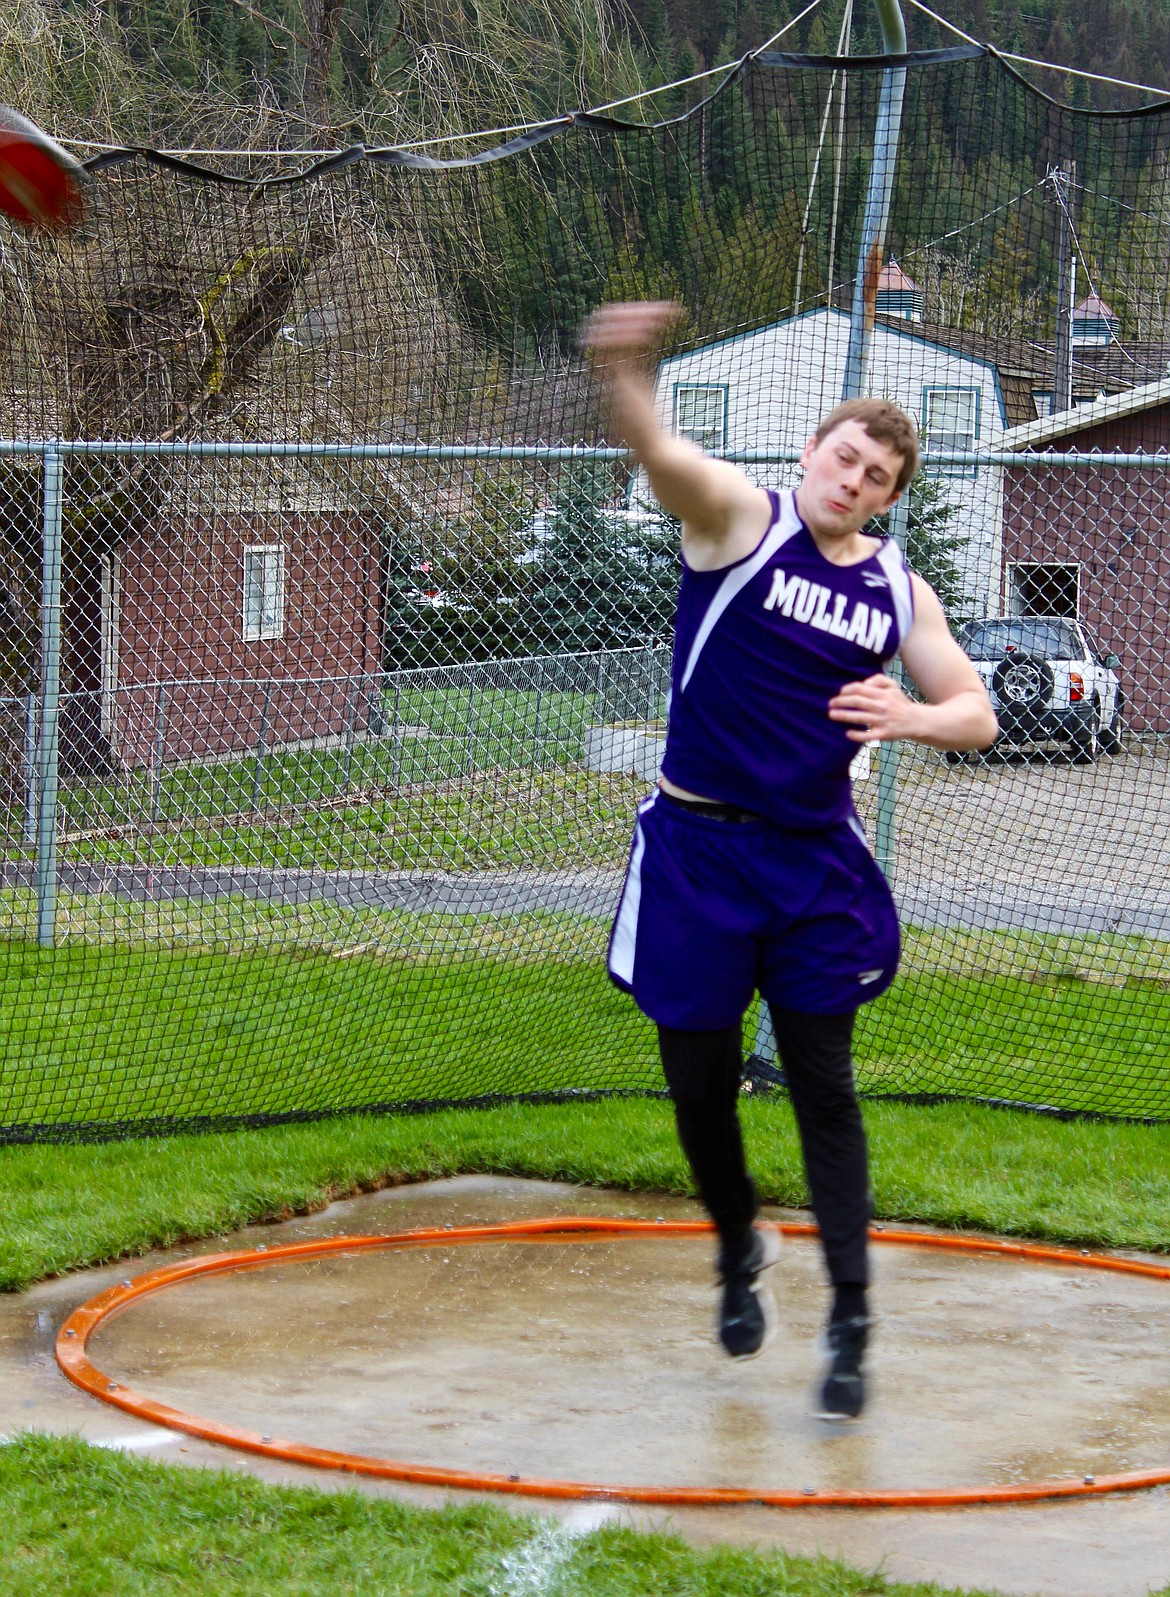 Mullan athlete Seth Dechand throws the discus at the Wallace track meet. As Mulan&#146;s only track athlete, Dechand won this event with a distance mark of 101&#146; 3.